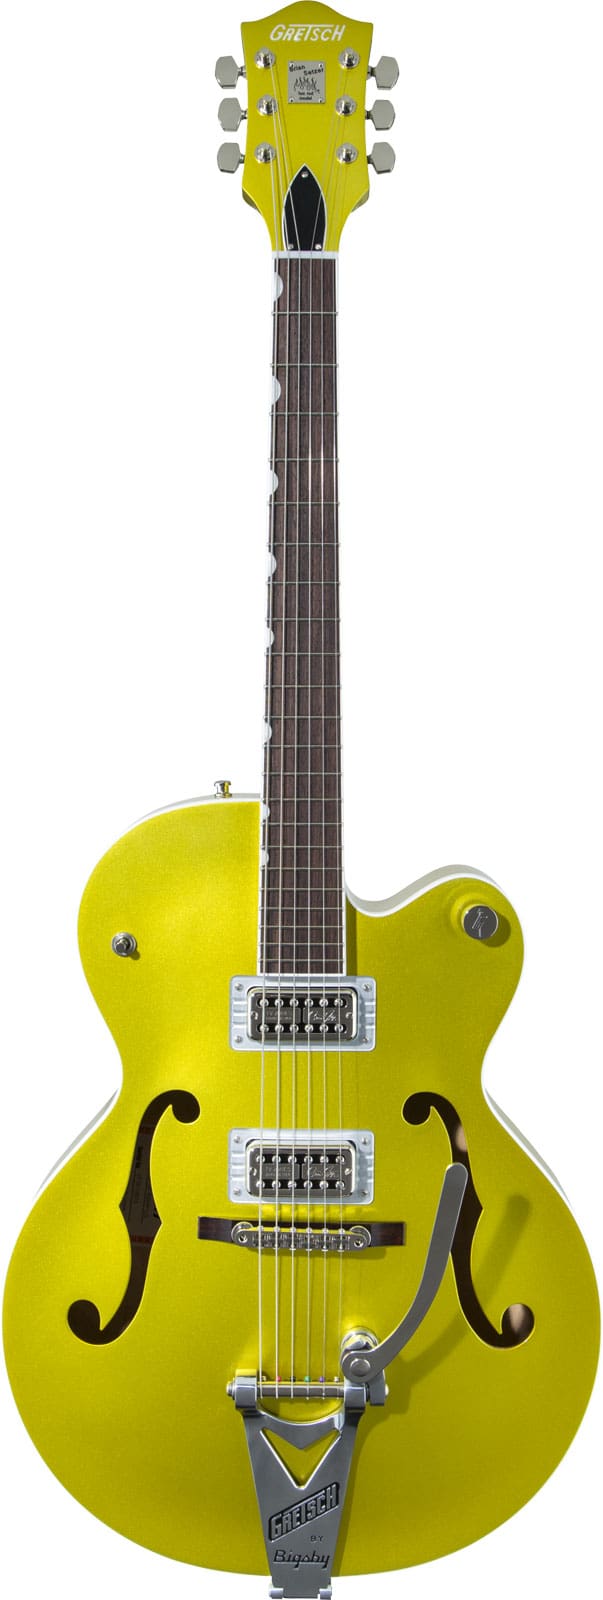 GRETSCH GUITARS G6120T-HR BRIAN SETZER SIGNATURE HOT ROD HOLLOW BODY WITH BIGSBY RW, LIME GOLD